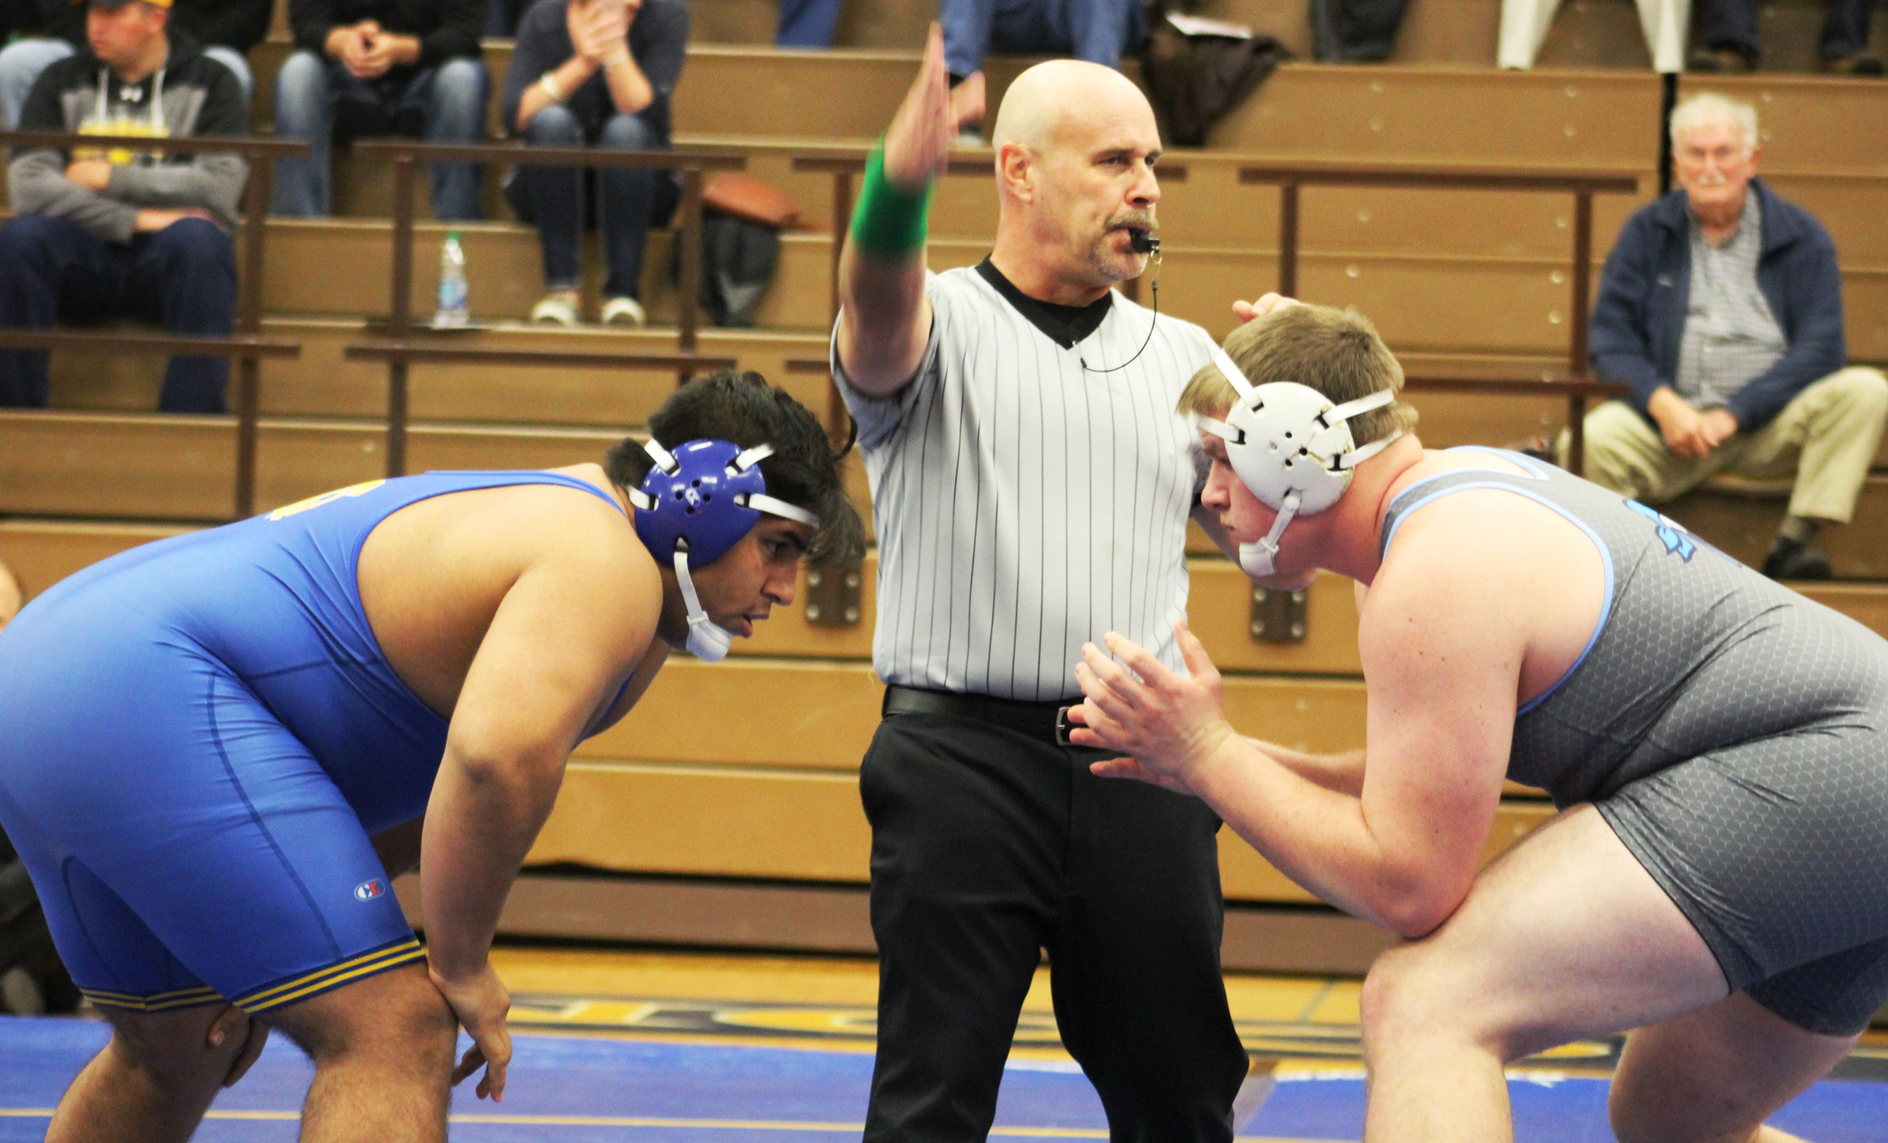 NIACC wrestlers ranked 19th, Pena ranked 5th